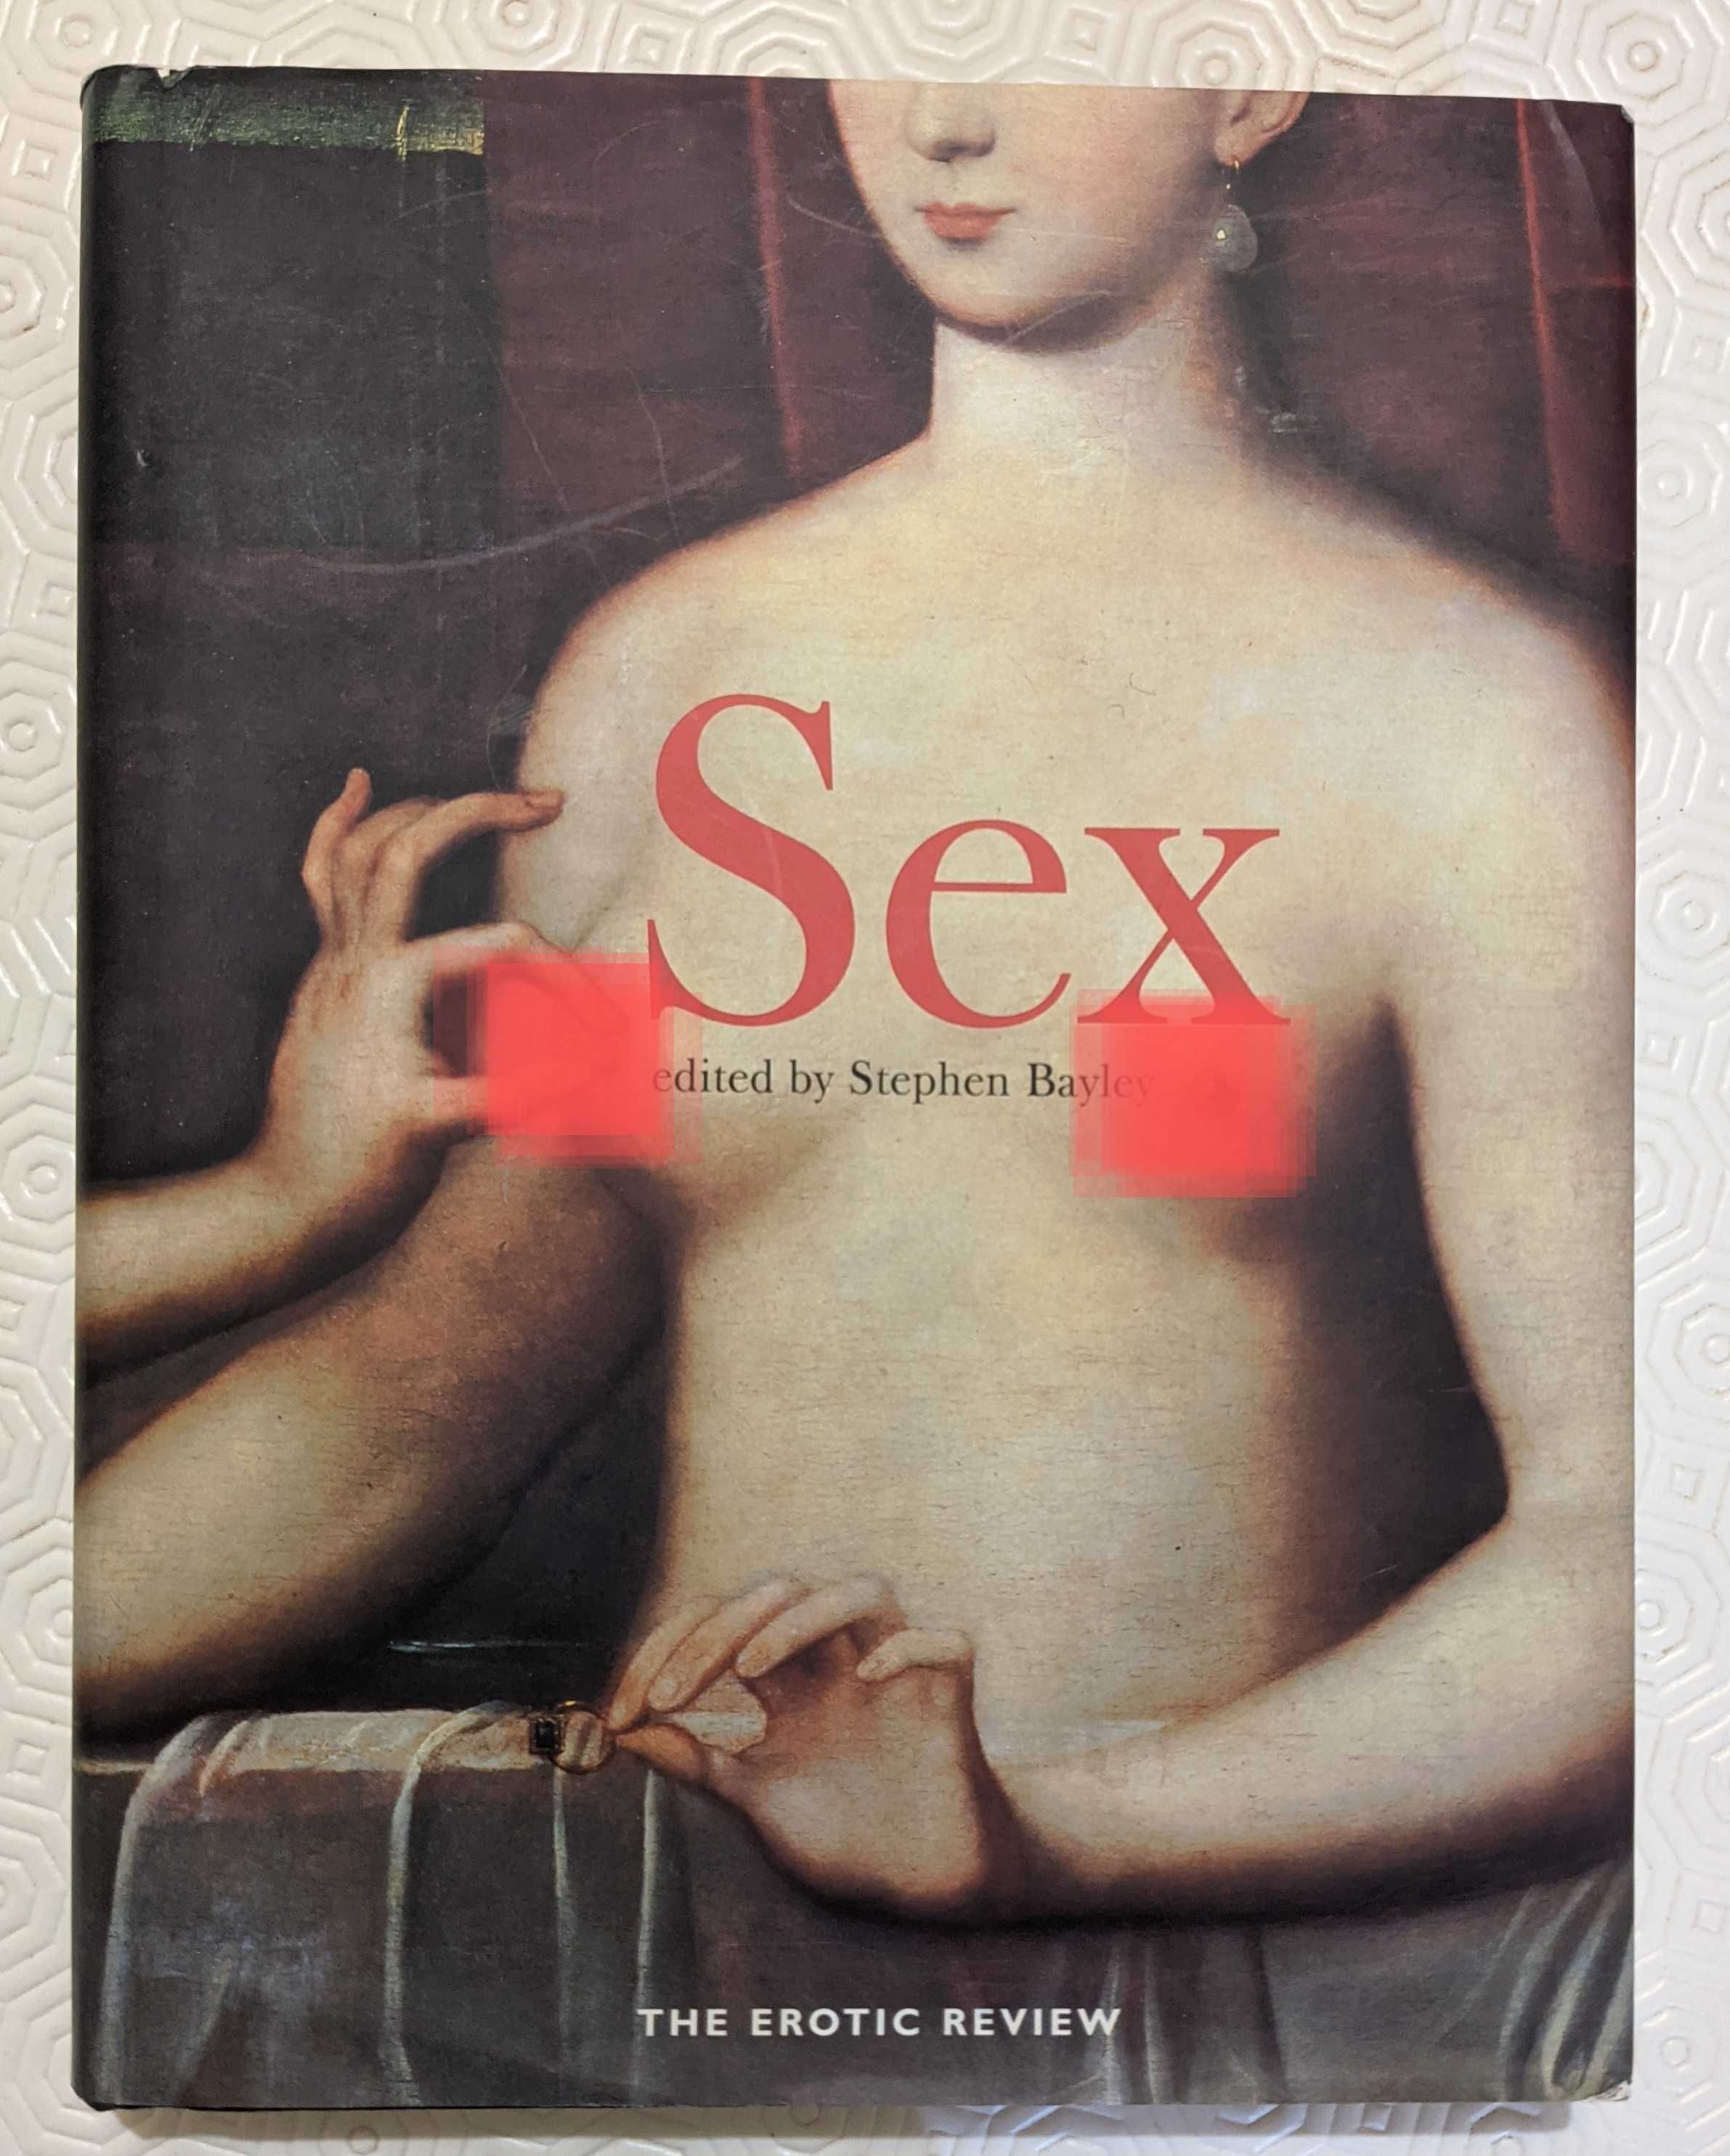 Sex - The erotic review